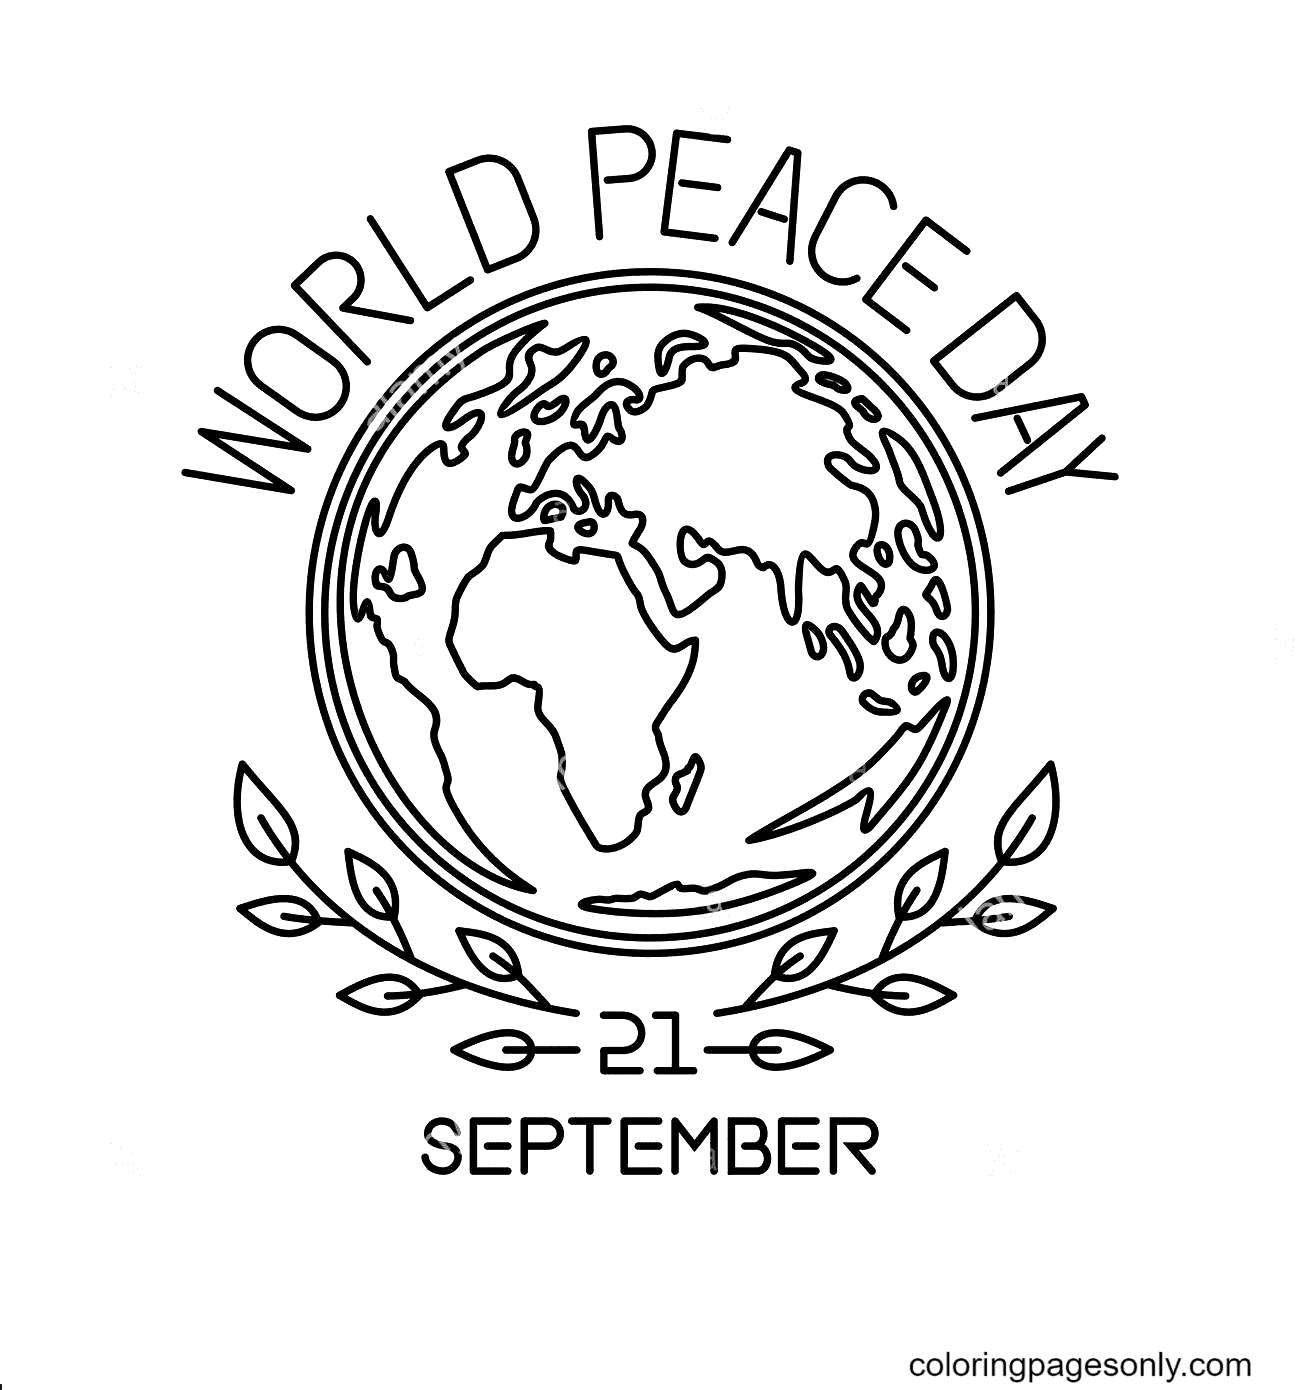 World Peace Day line logo Coloring Page